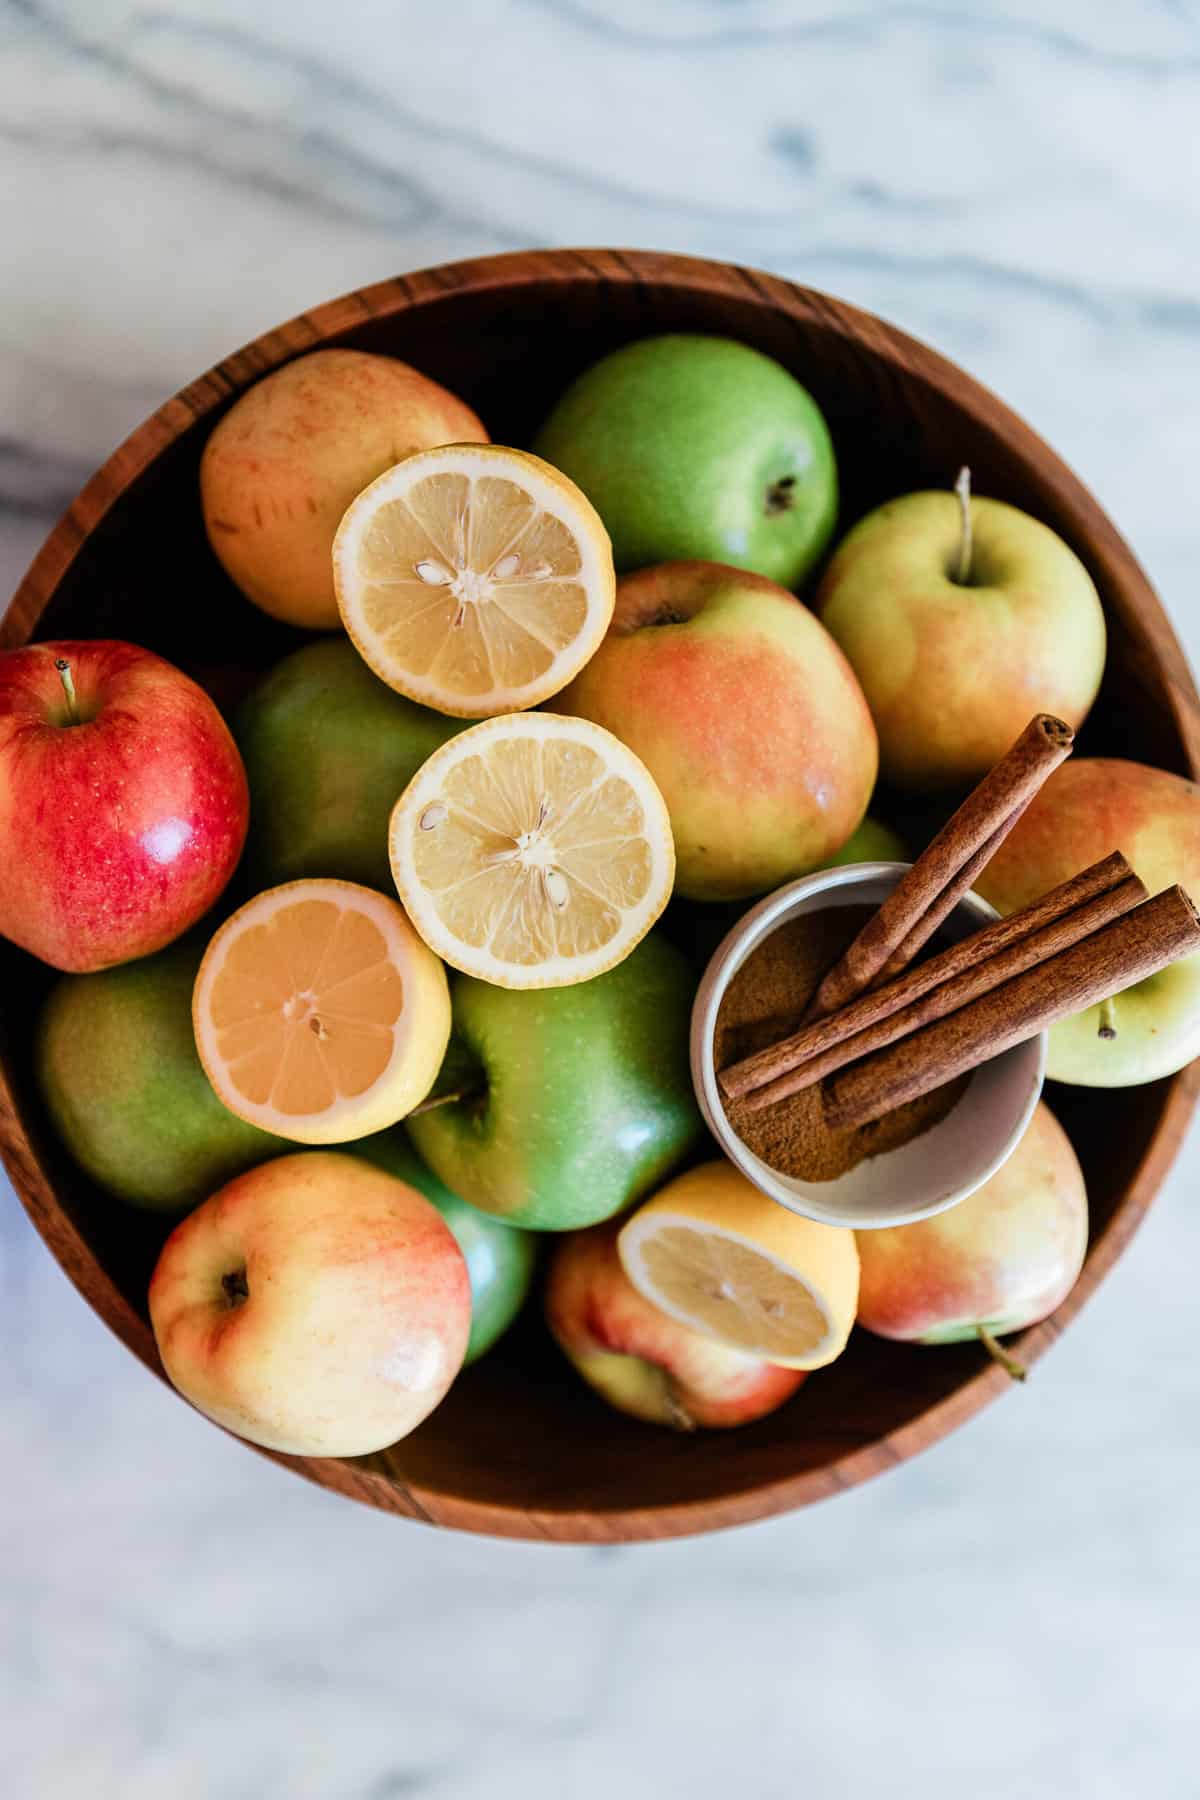 Apples, lemons, and cinnamon in a large wooden bowl.